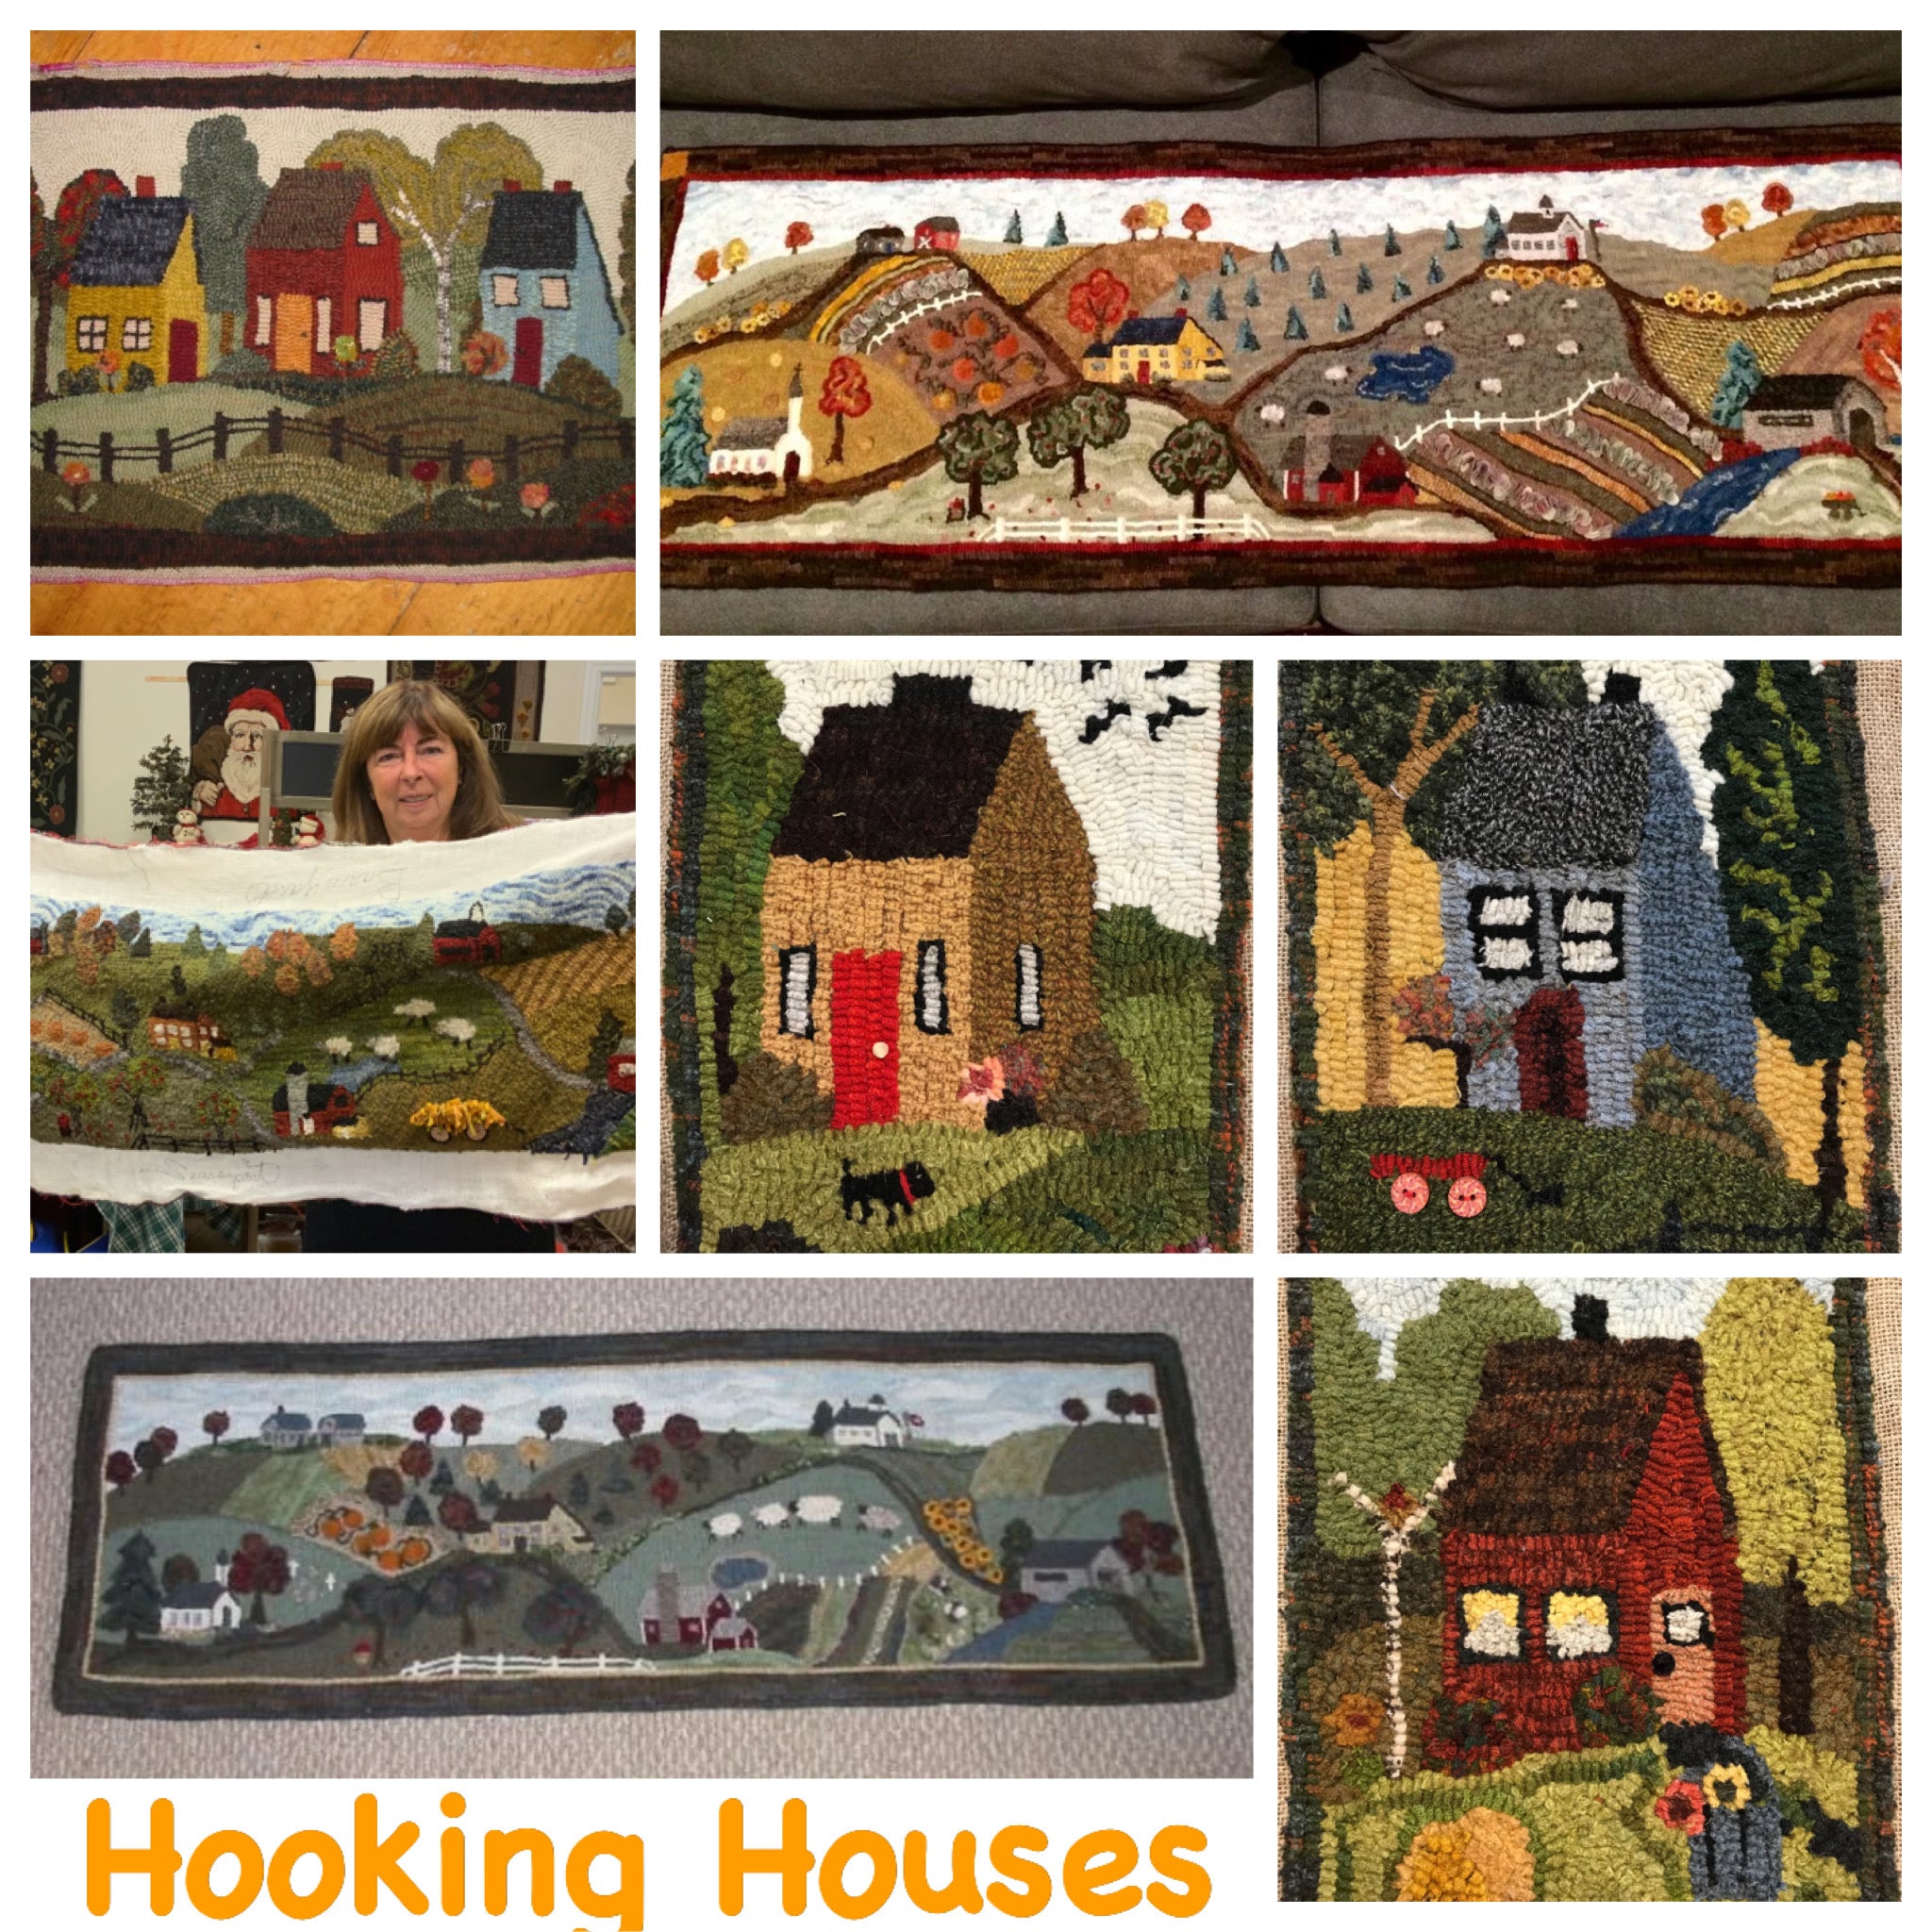 Let’s Talk About Hooking Houses!